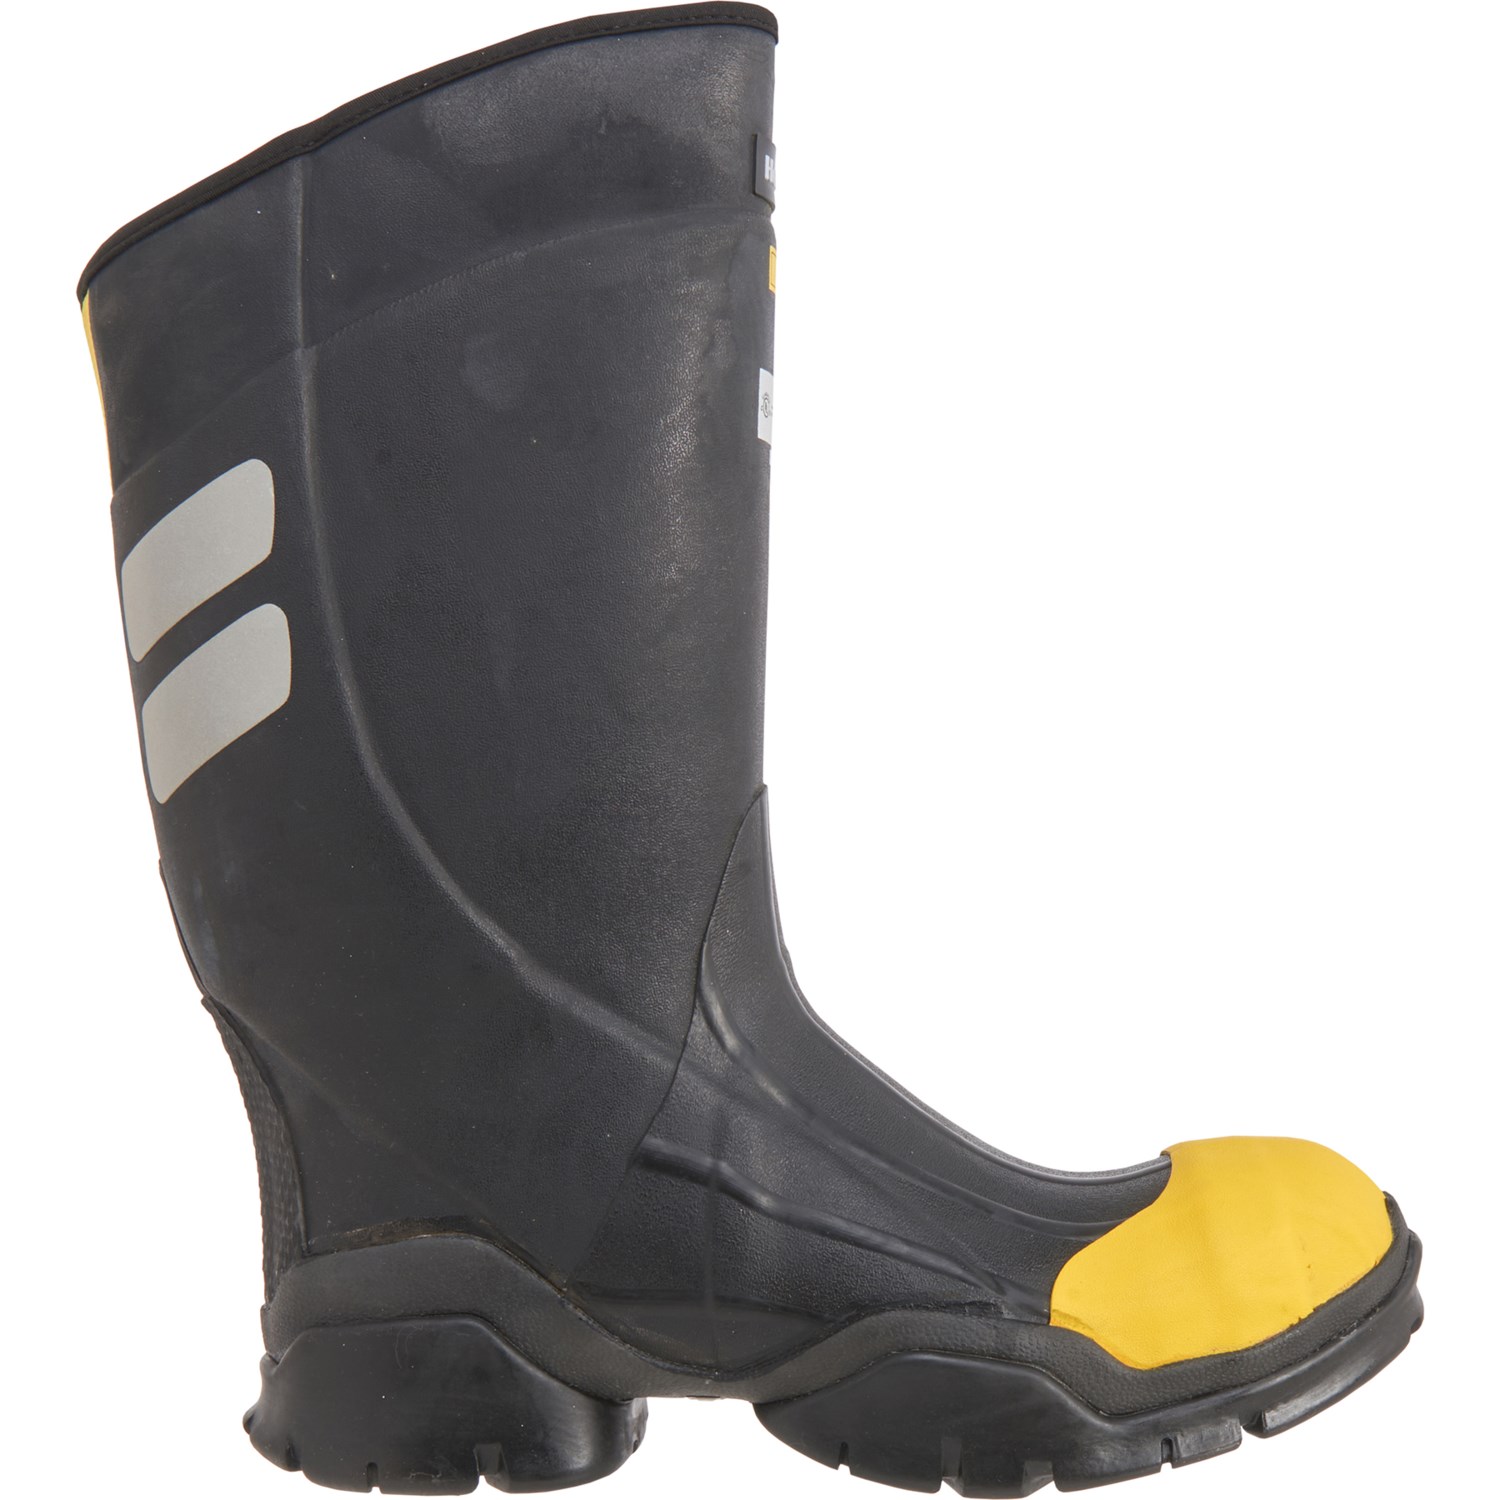 Ranger Rubber Mining Boots (For Men) Save 50